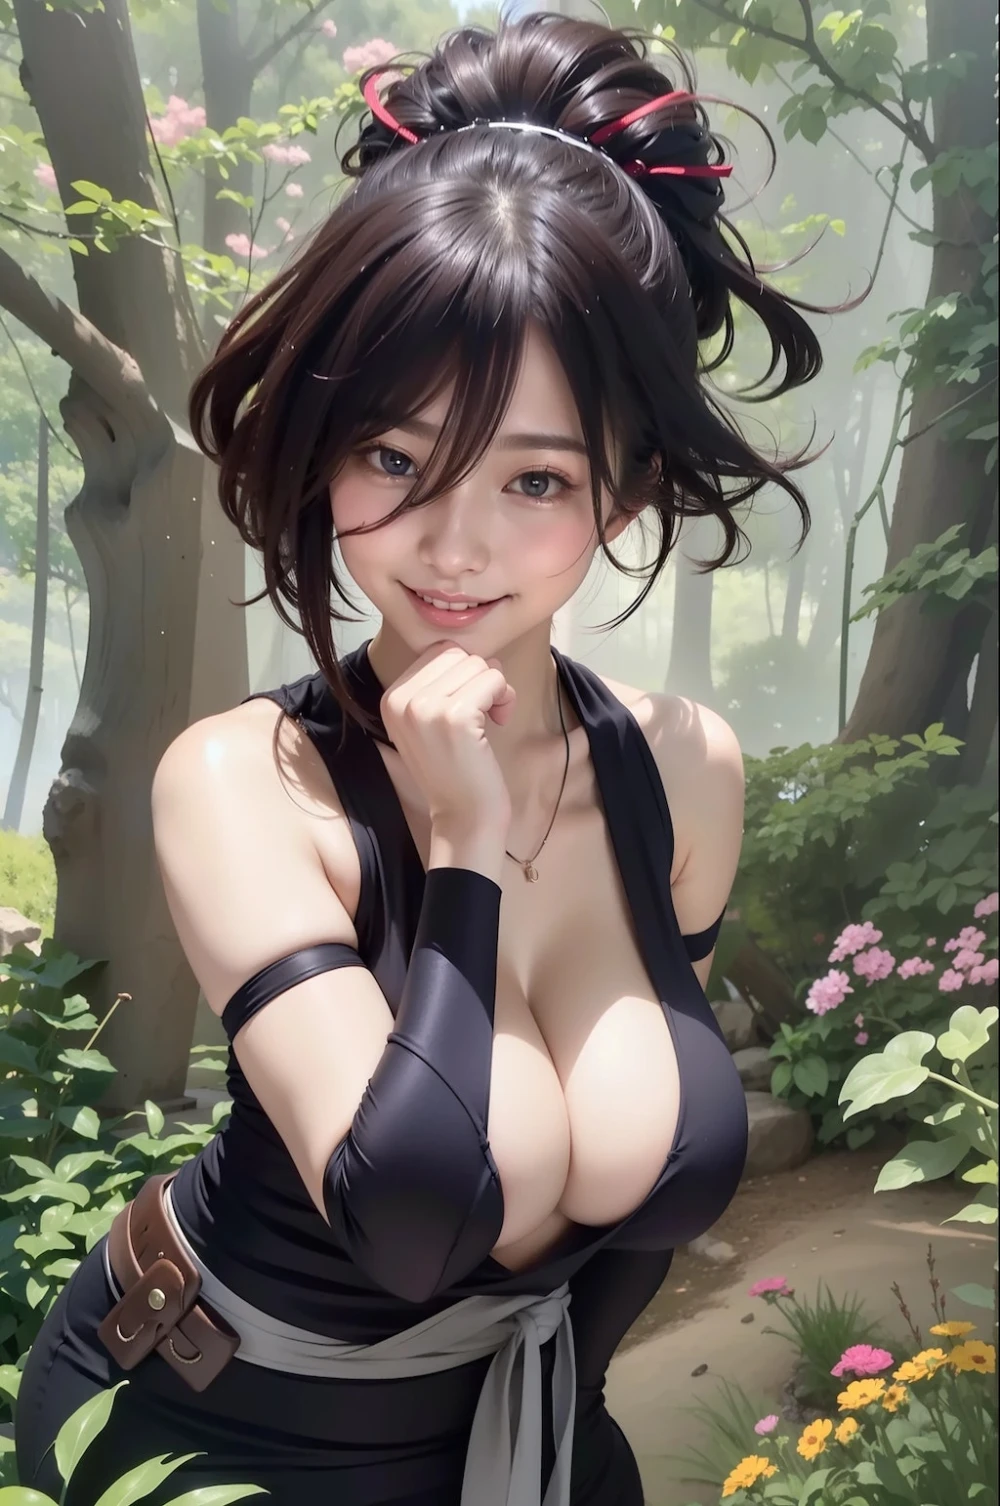 large-breasts-realistic-style-all-ages-2-26